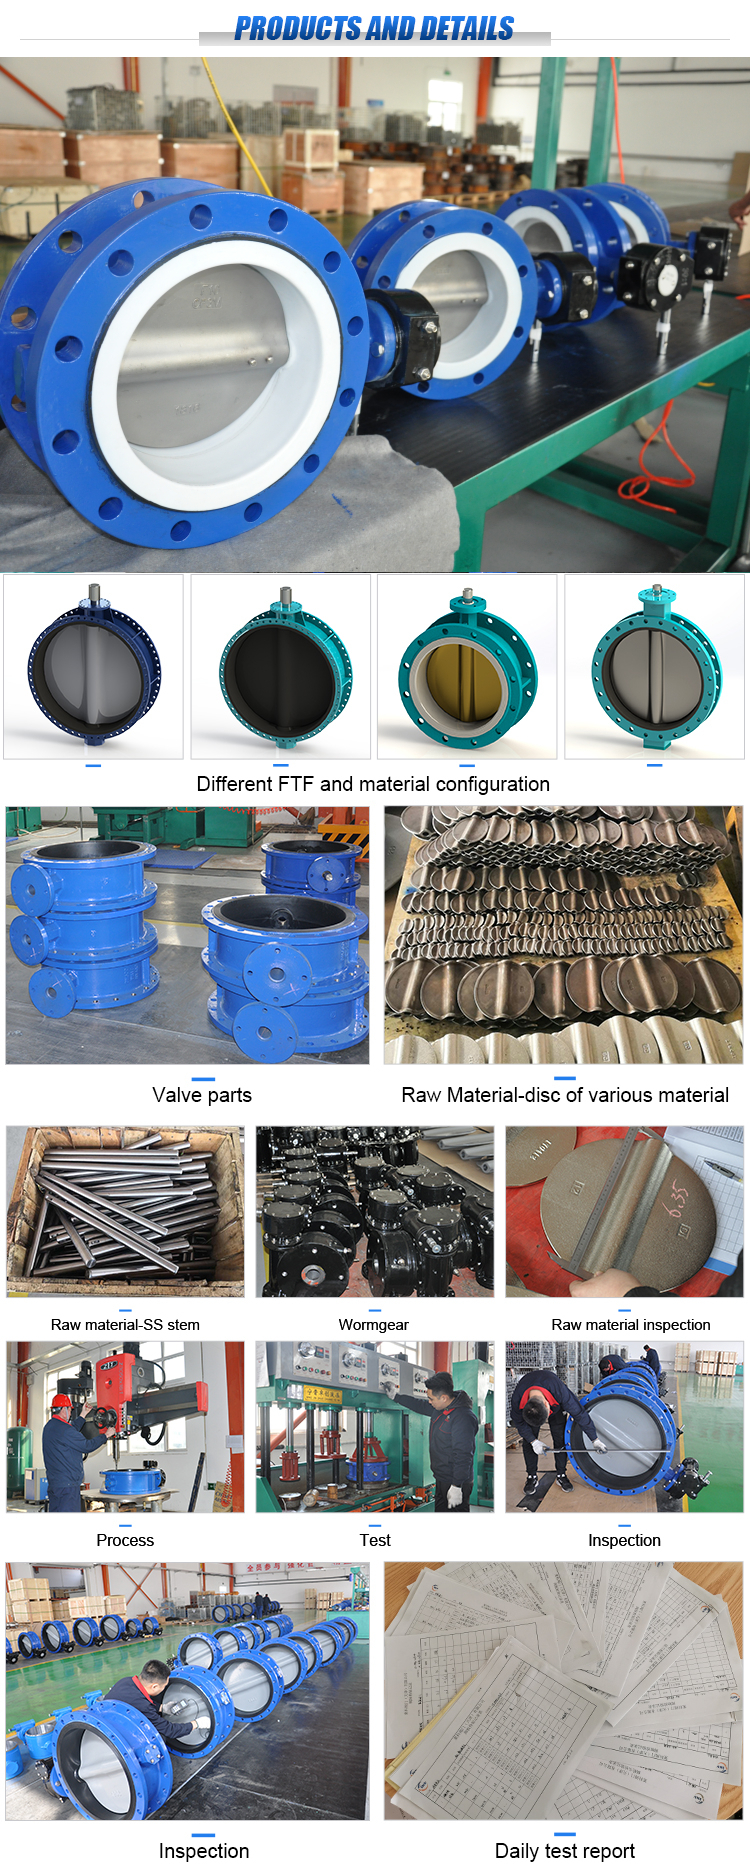 Product Name PTFE Seal Pn10/16/25 Double Flange Butterfly Valve with Worm Gear Operated Size (mm) 50-2000mm Flange connection standard selection EN1092 PN10,PN16; ASME 125LB,150LB; JIS10K;      Material Selection Body/Shell GGG40/50; WCB; CF8; CF8M; 2205; 2507; Al-bronze Disc GGG40/50; CF8; CF8M; 2205; 2507; 1.4529; Al-bronze; Rubber coated; PTFE lined; Nylon coated; Halar coated Stem/shaft SS410/420/416; SS431; SS304; Monel   Seat material and suitable Temp. EPDM -10℃ ~ +80℃ NBR -10℃ ~ +80℃ Vaiton -10℃ ~ +180℃ Heat resistant EPDM -10℃ ~ +120℃ PTFE -10℃ ~ +150℃ Operating selection Hand Lever Worm gear Electric actuator Pneumatic actuator Hydraulic actuator